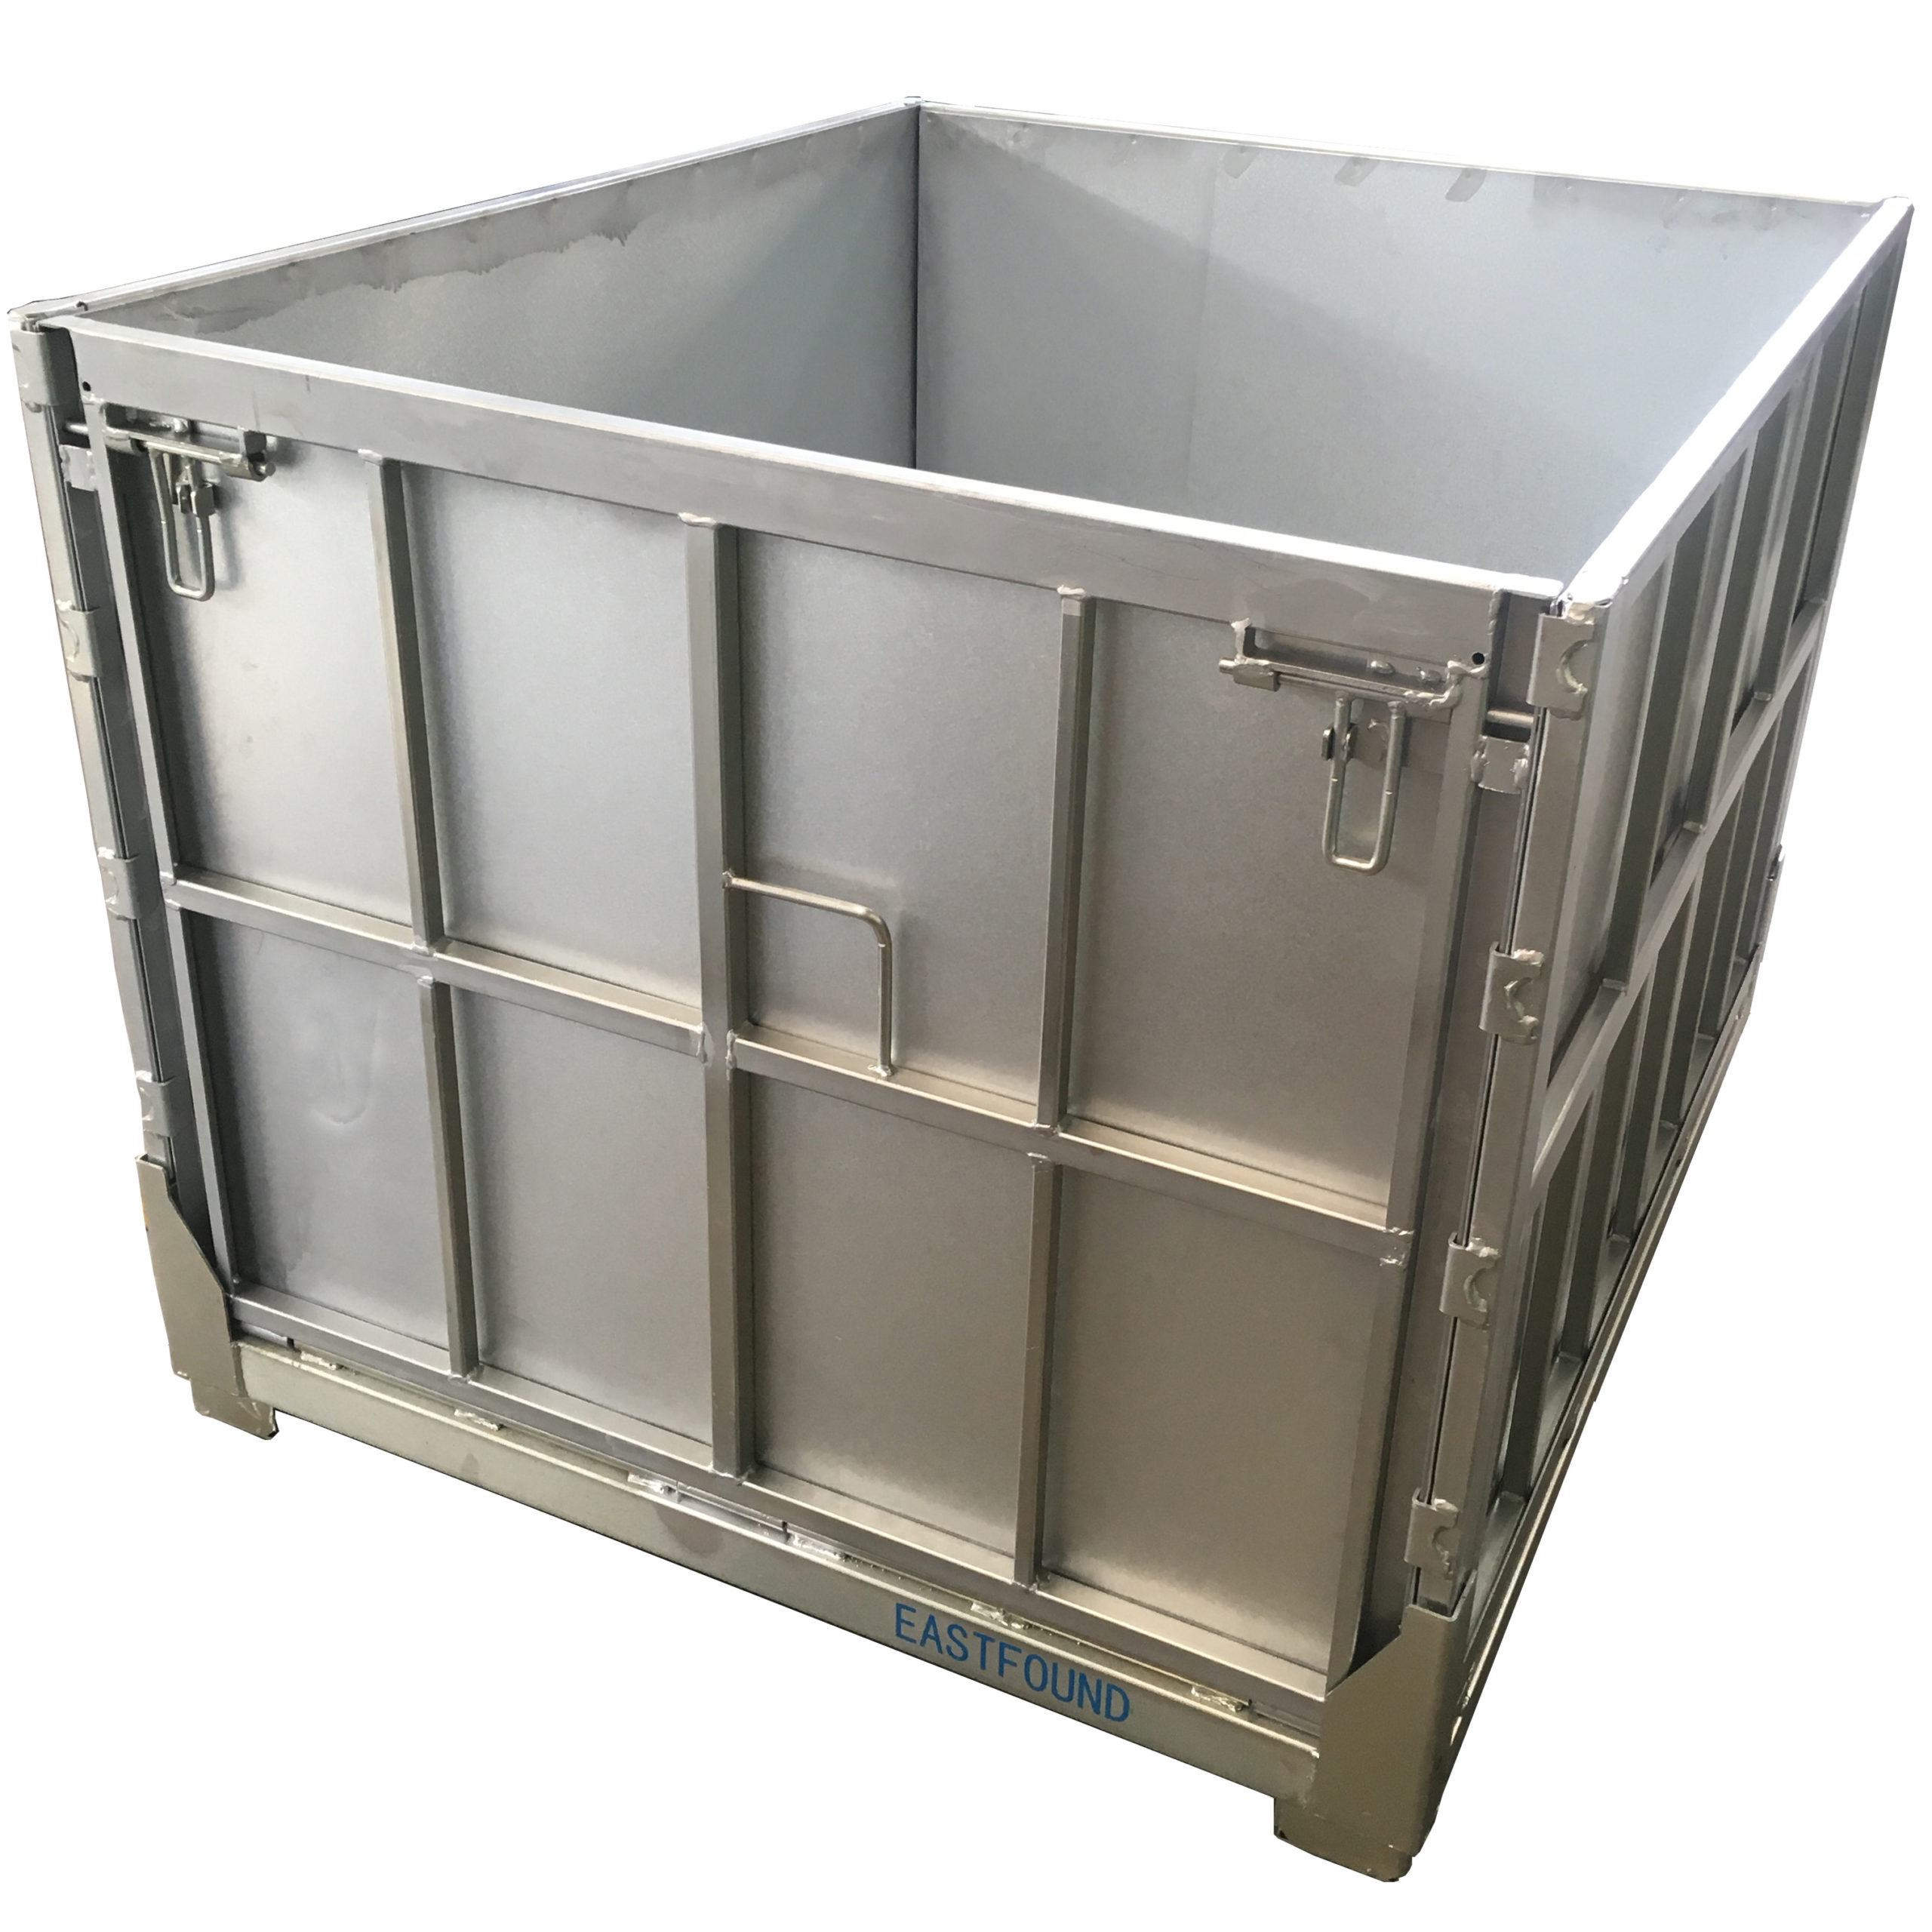 https://rackandshelf.com/wp-content/uploads/WorldTainer-Collapsible-Knock-Down-IBC-Intermediate-Bulk-Container-MC-1-NL-Without-Lid-1-scaled.jpg